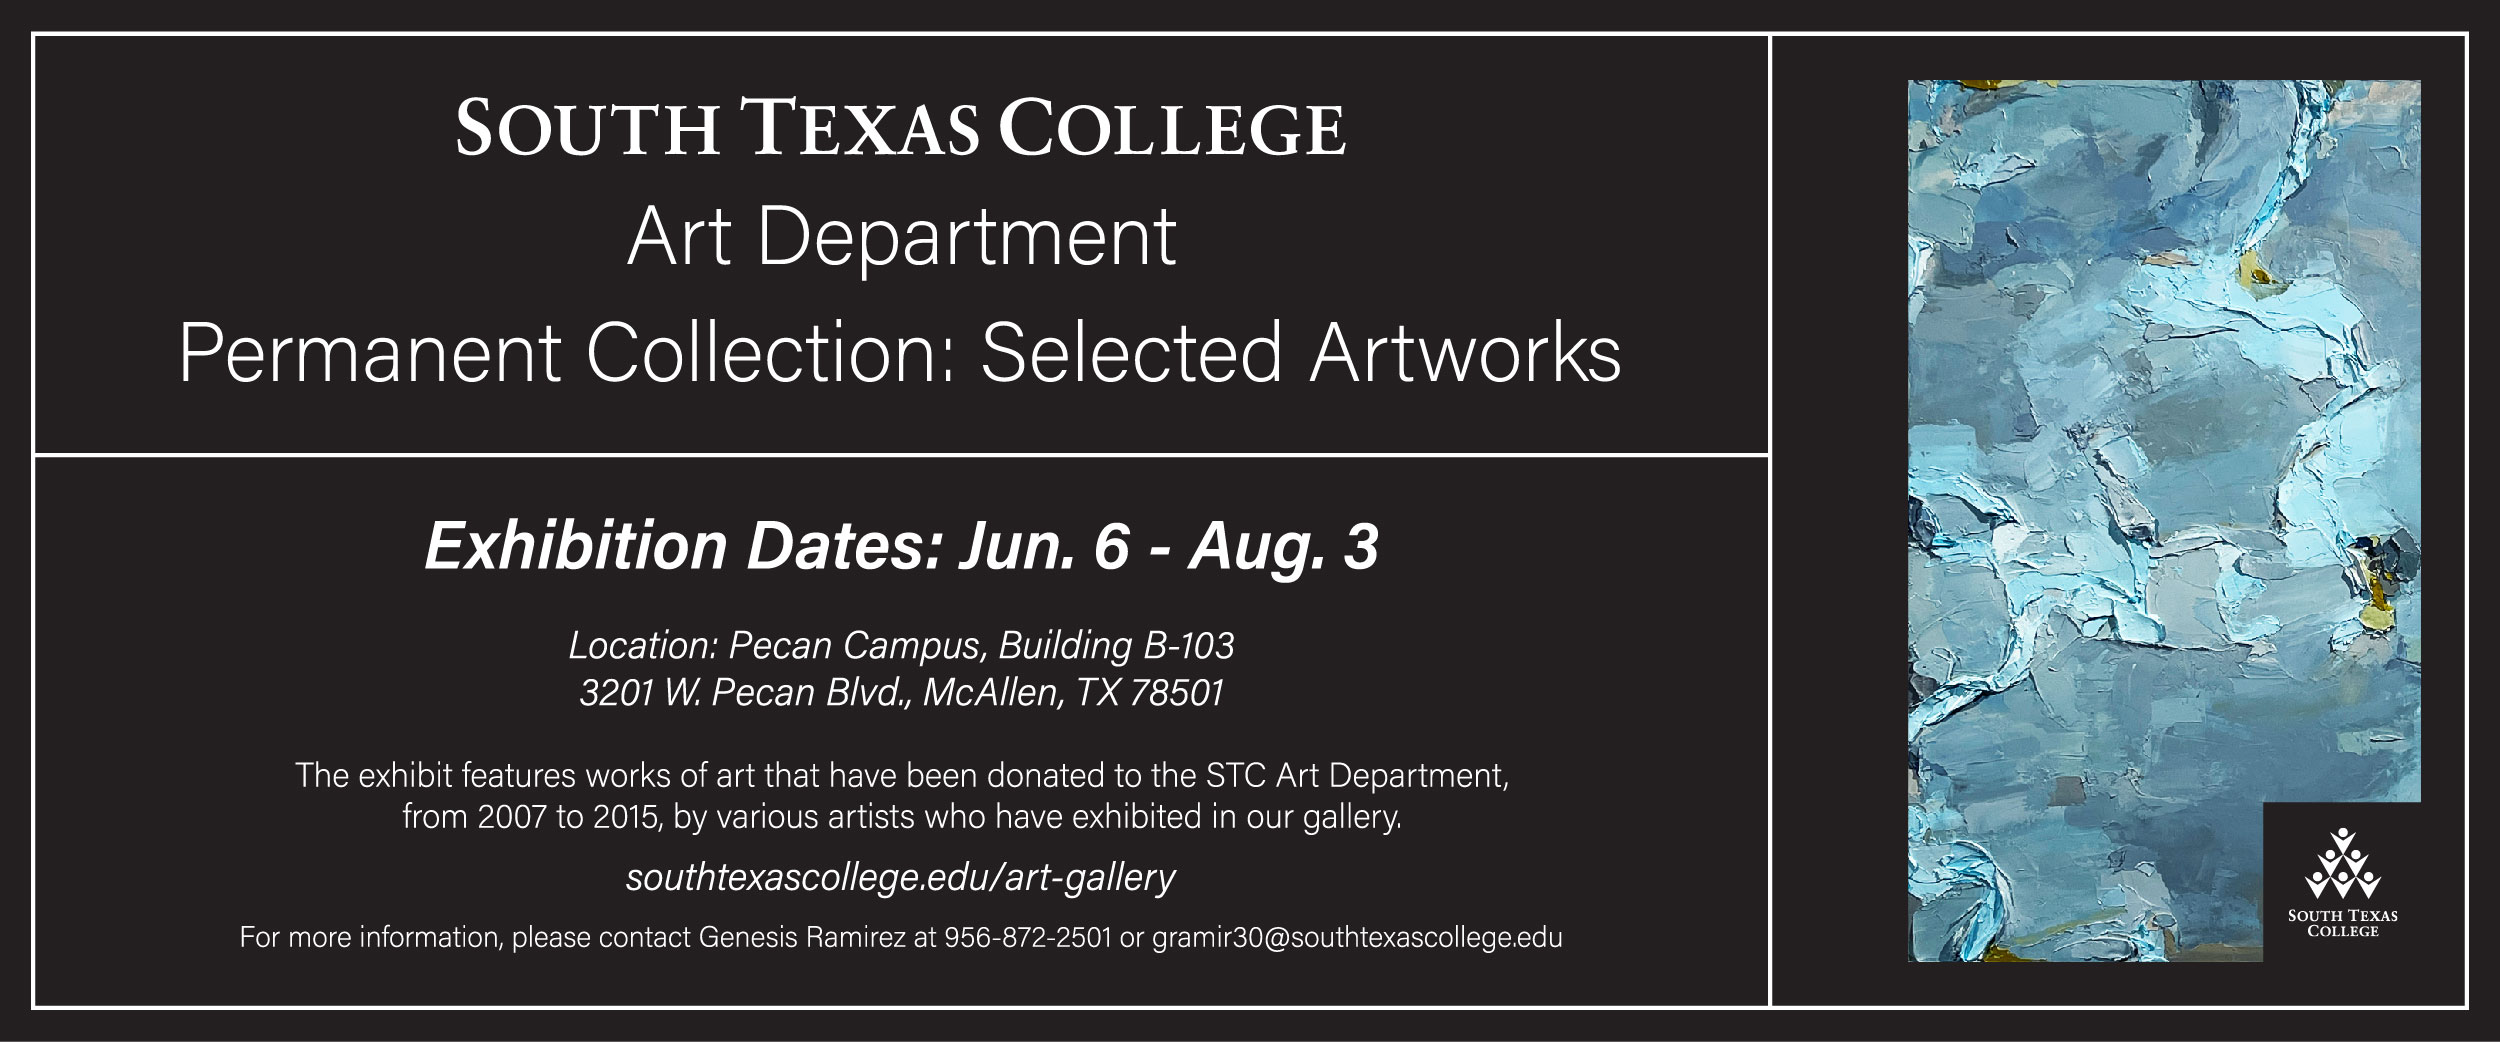 South Texas College Art Department Permanent Collection: Selected Artworks